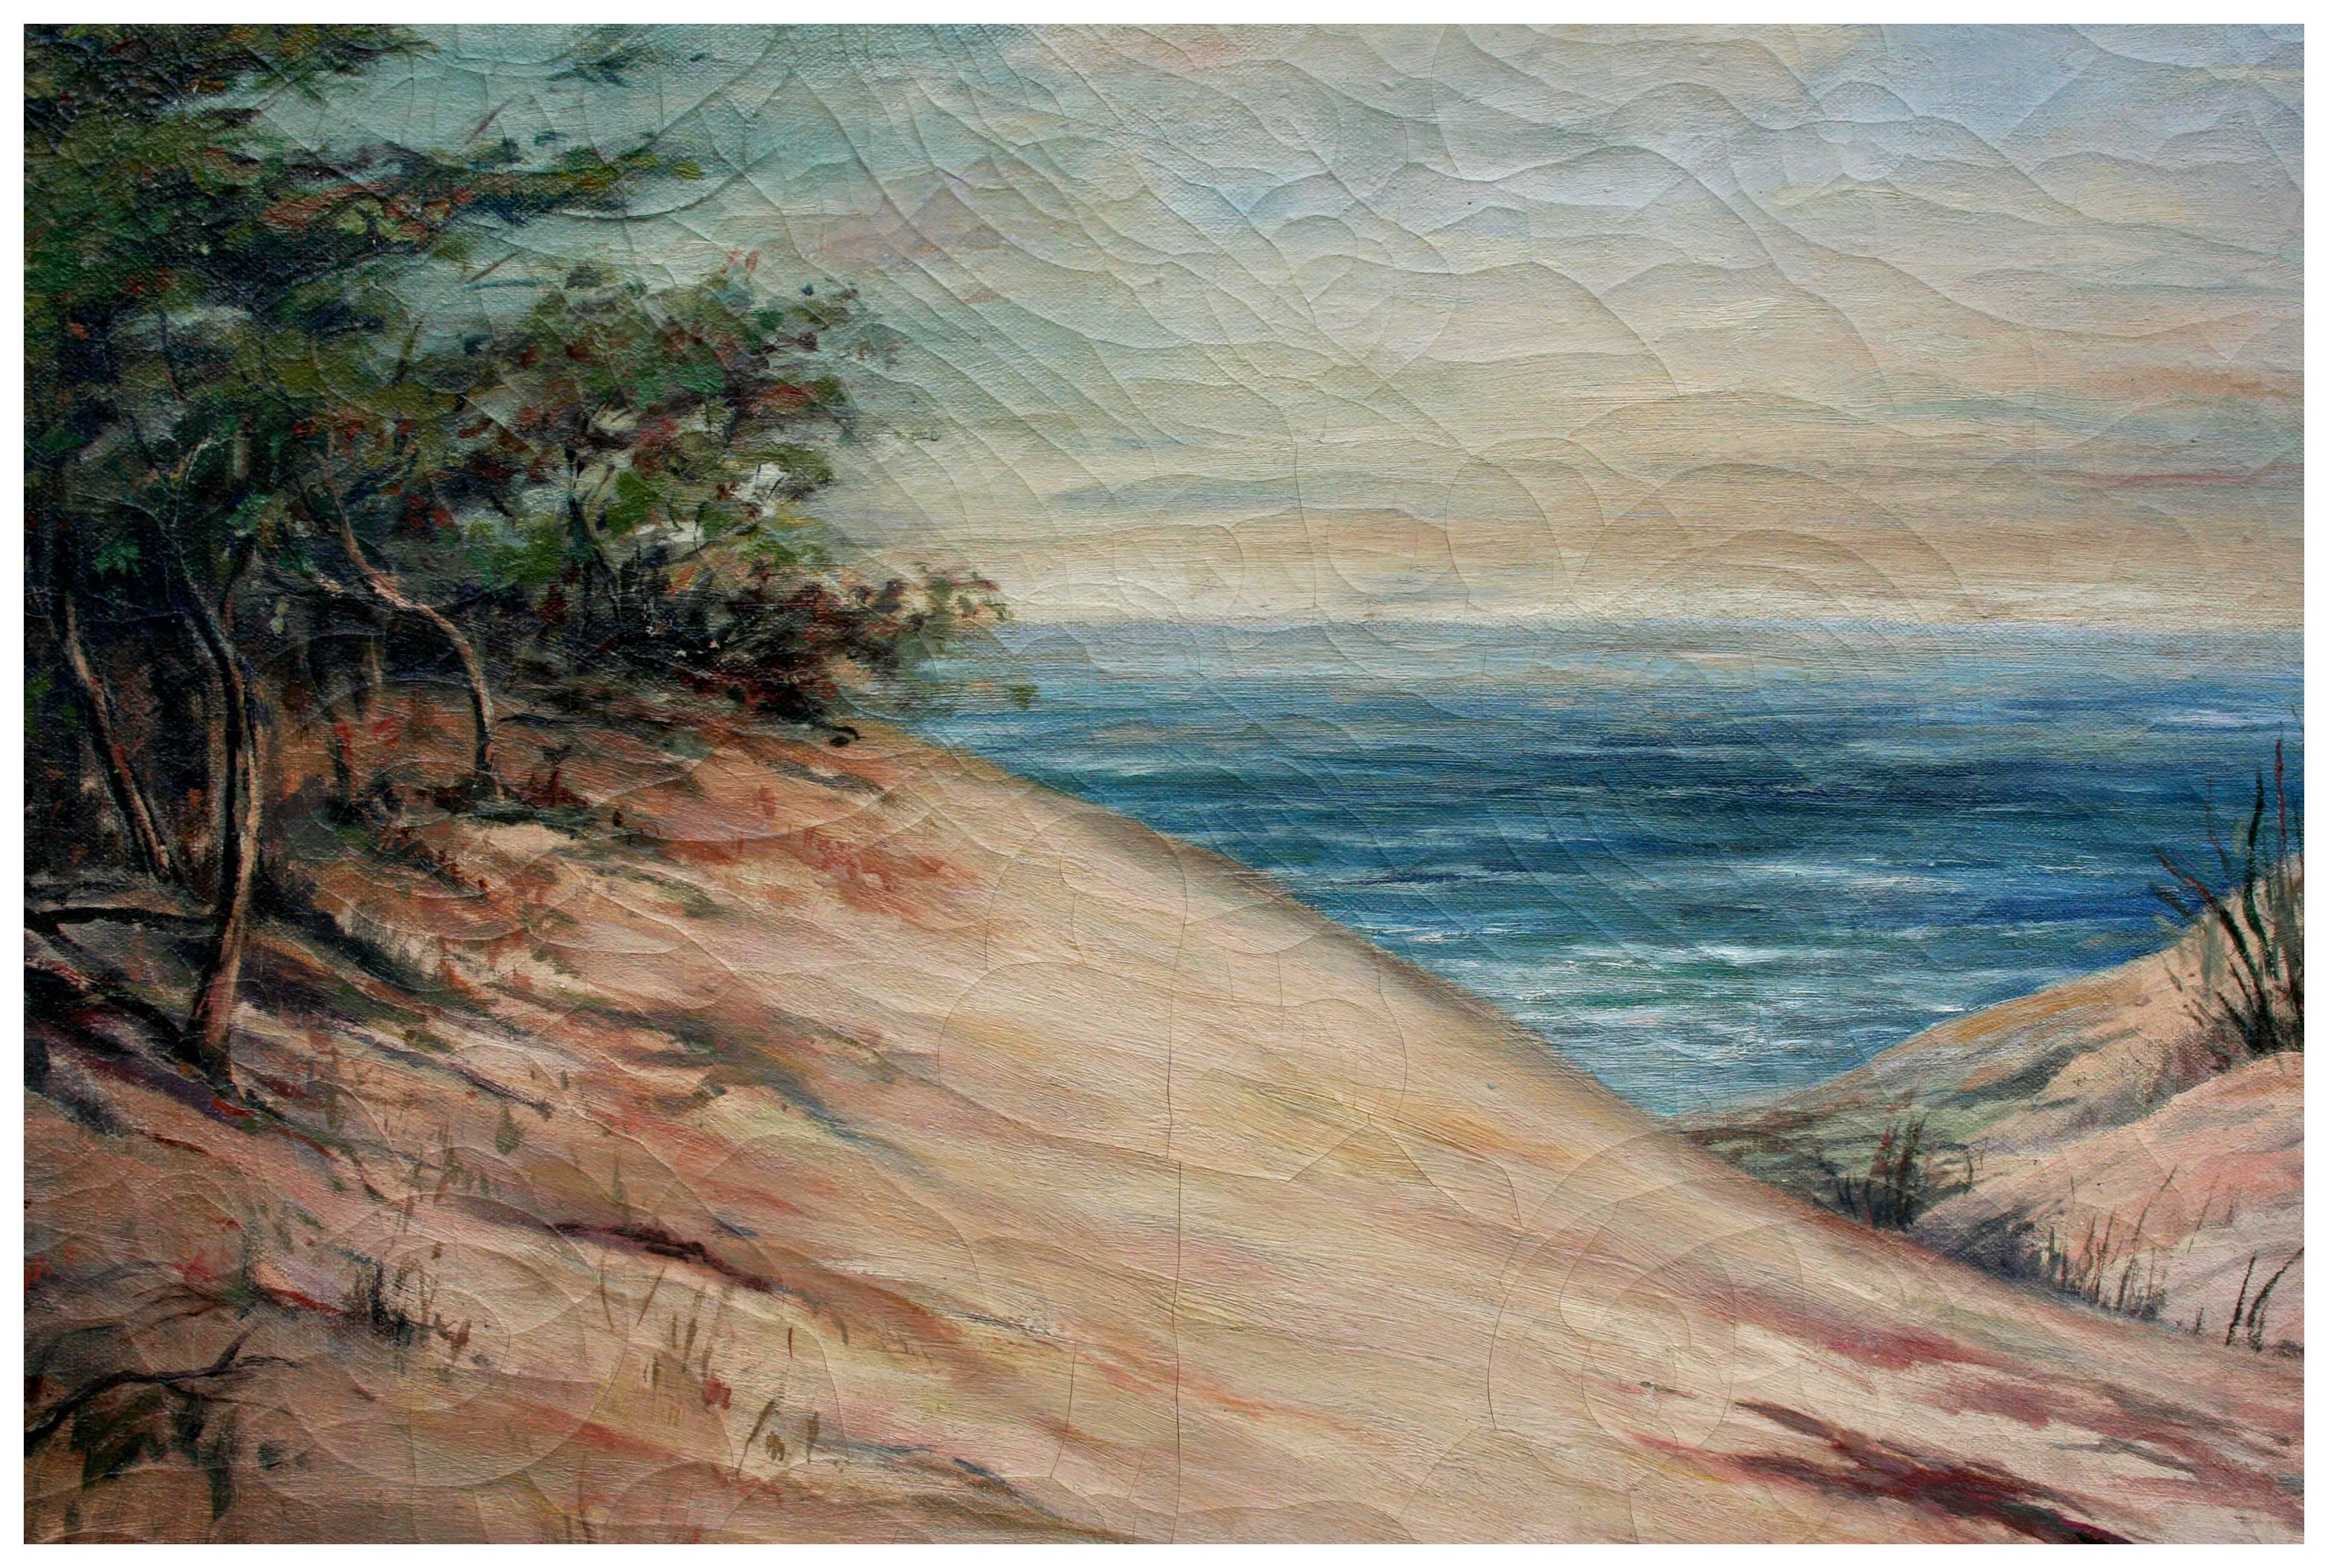 Early 20th Century California Sand Dunes Landscape - Painting by Rowena R. Smith